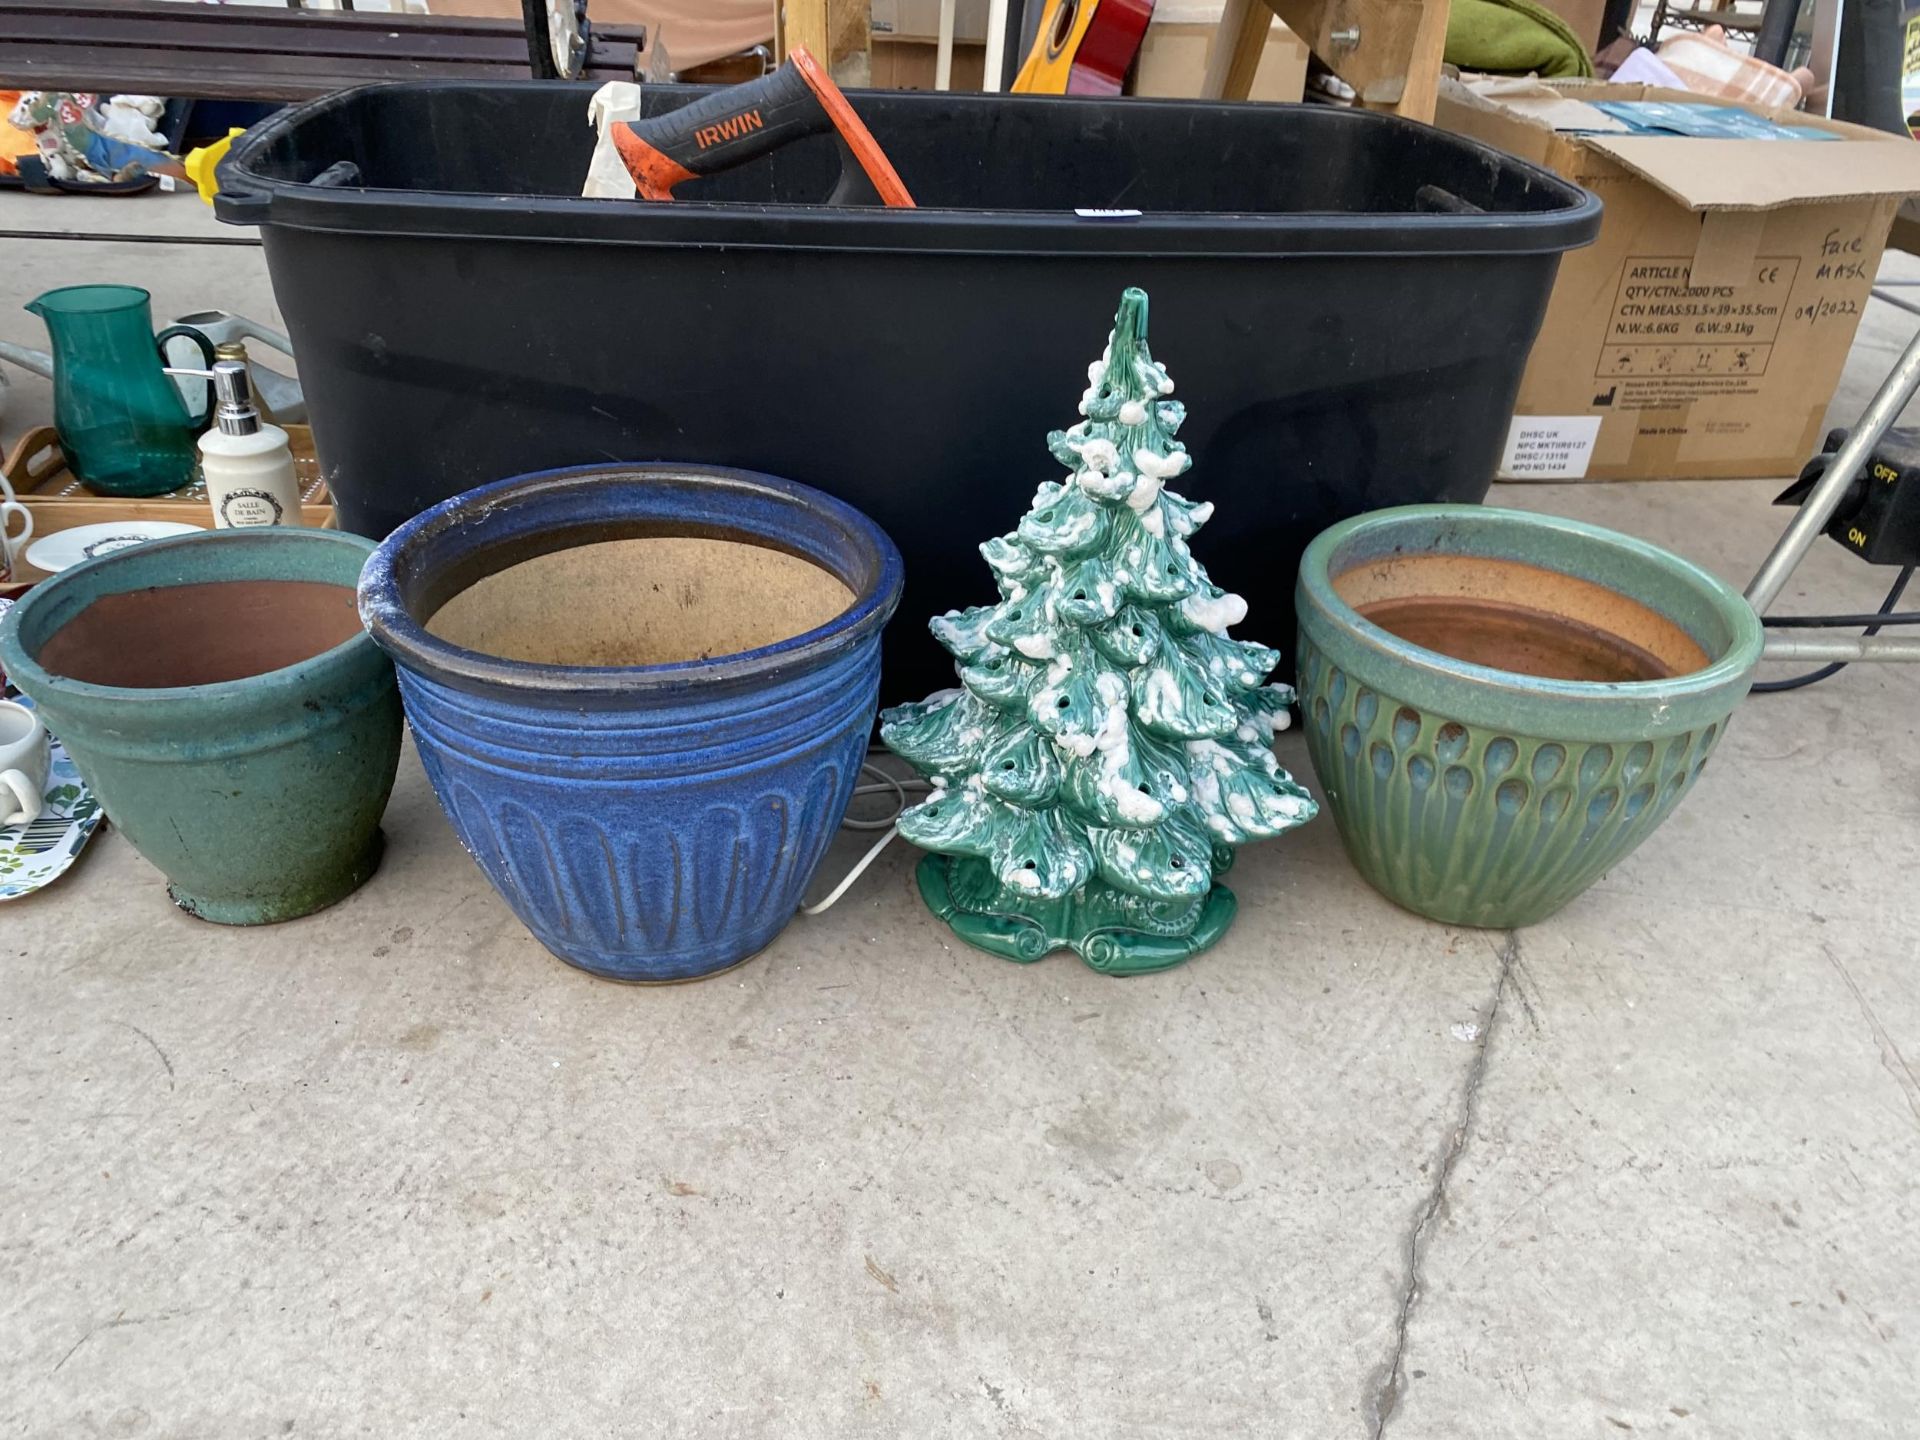 AN ASSORTMENT OF CERAMIC GARDEN POTS AND PLANTERS - Image 2 of 5